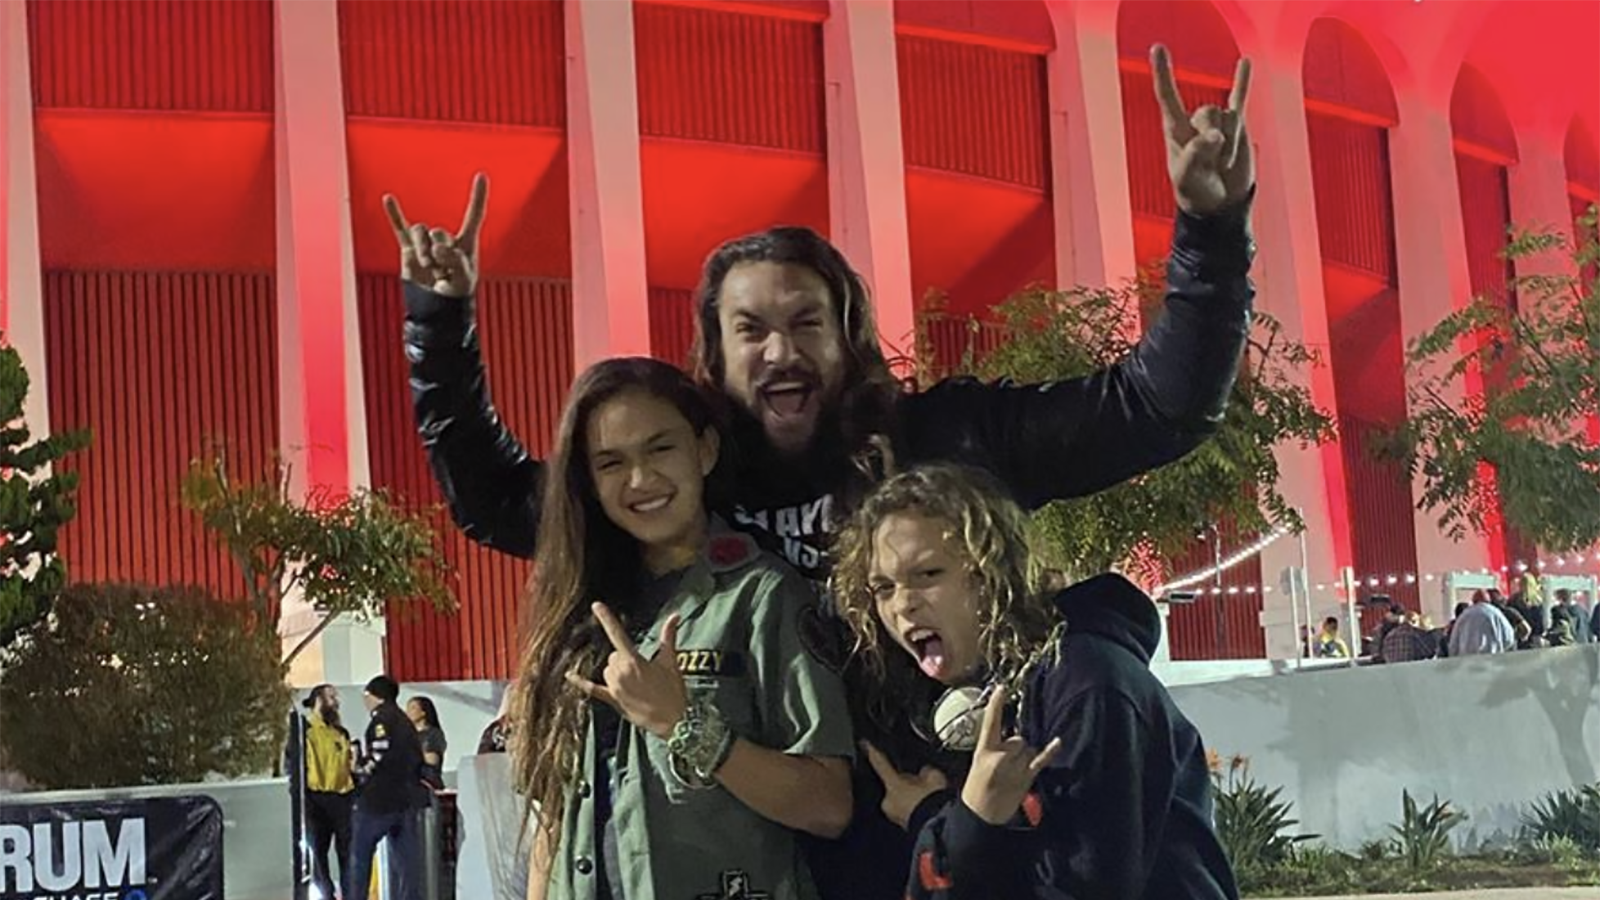 See Jason Momoa Rock Out With His Kids at Slayer's Final Show | Revolver1600 x 900